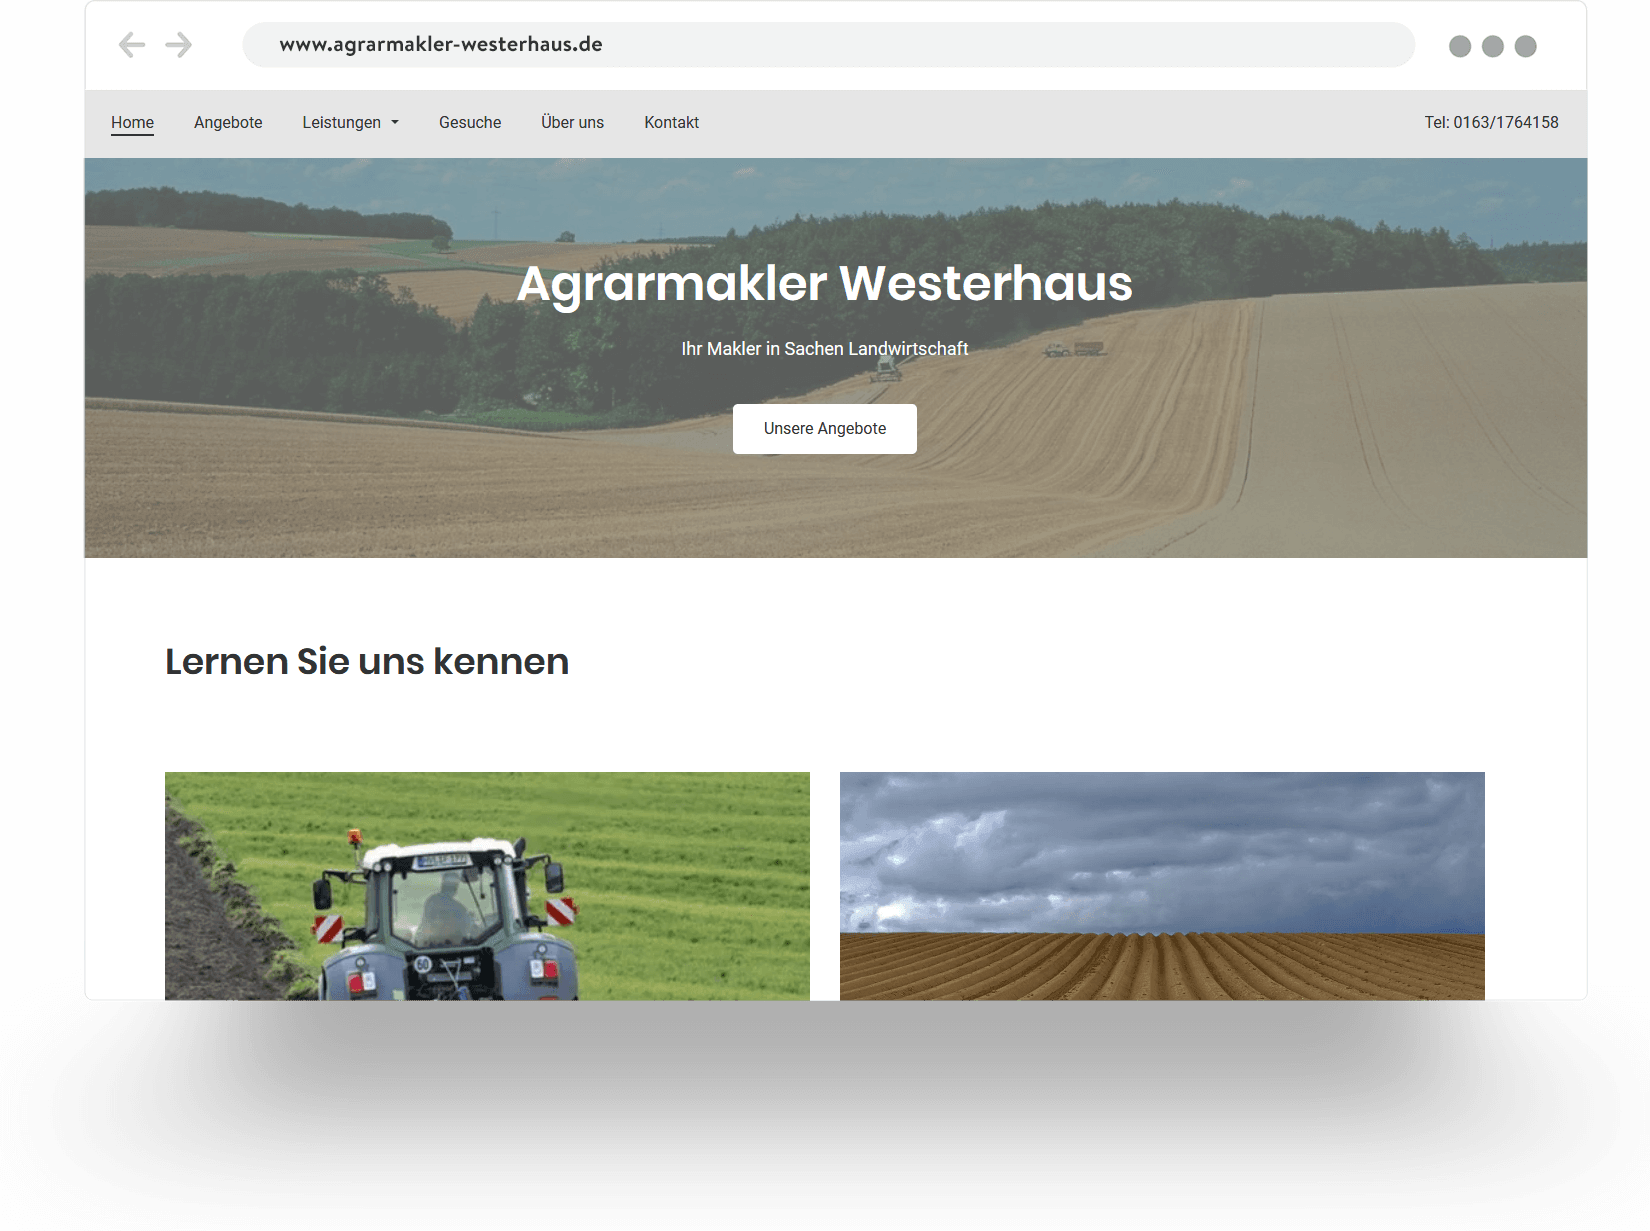 Example of an agricultural realtor's website built with Jimdo showing a field of crops and a tractor at work